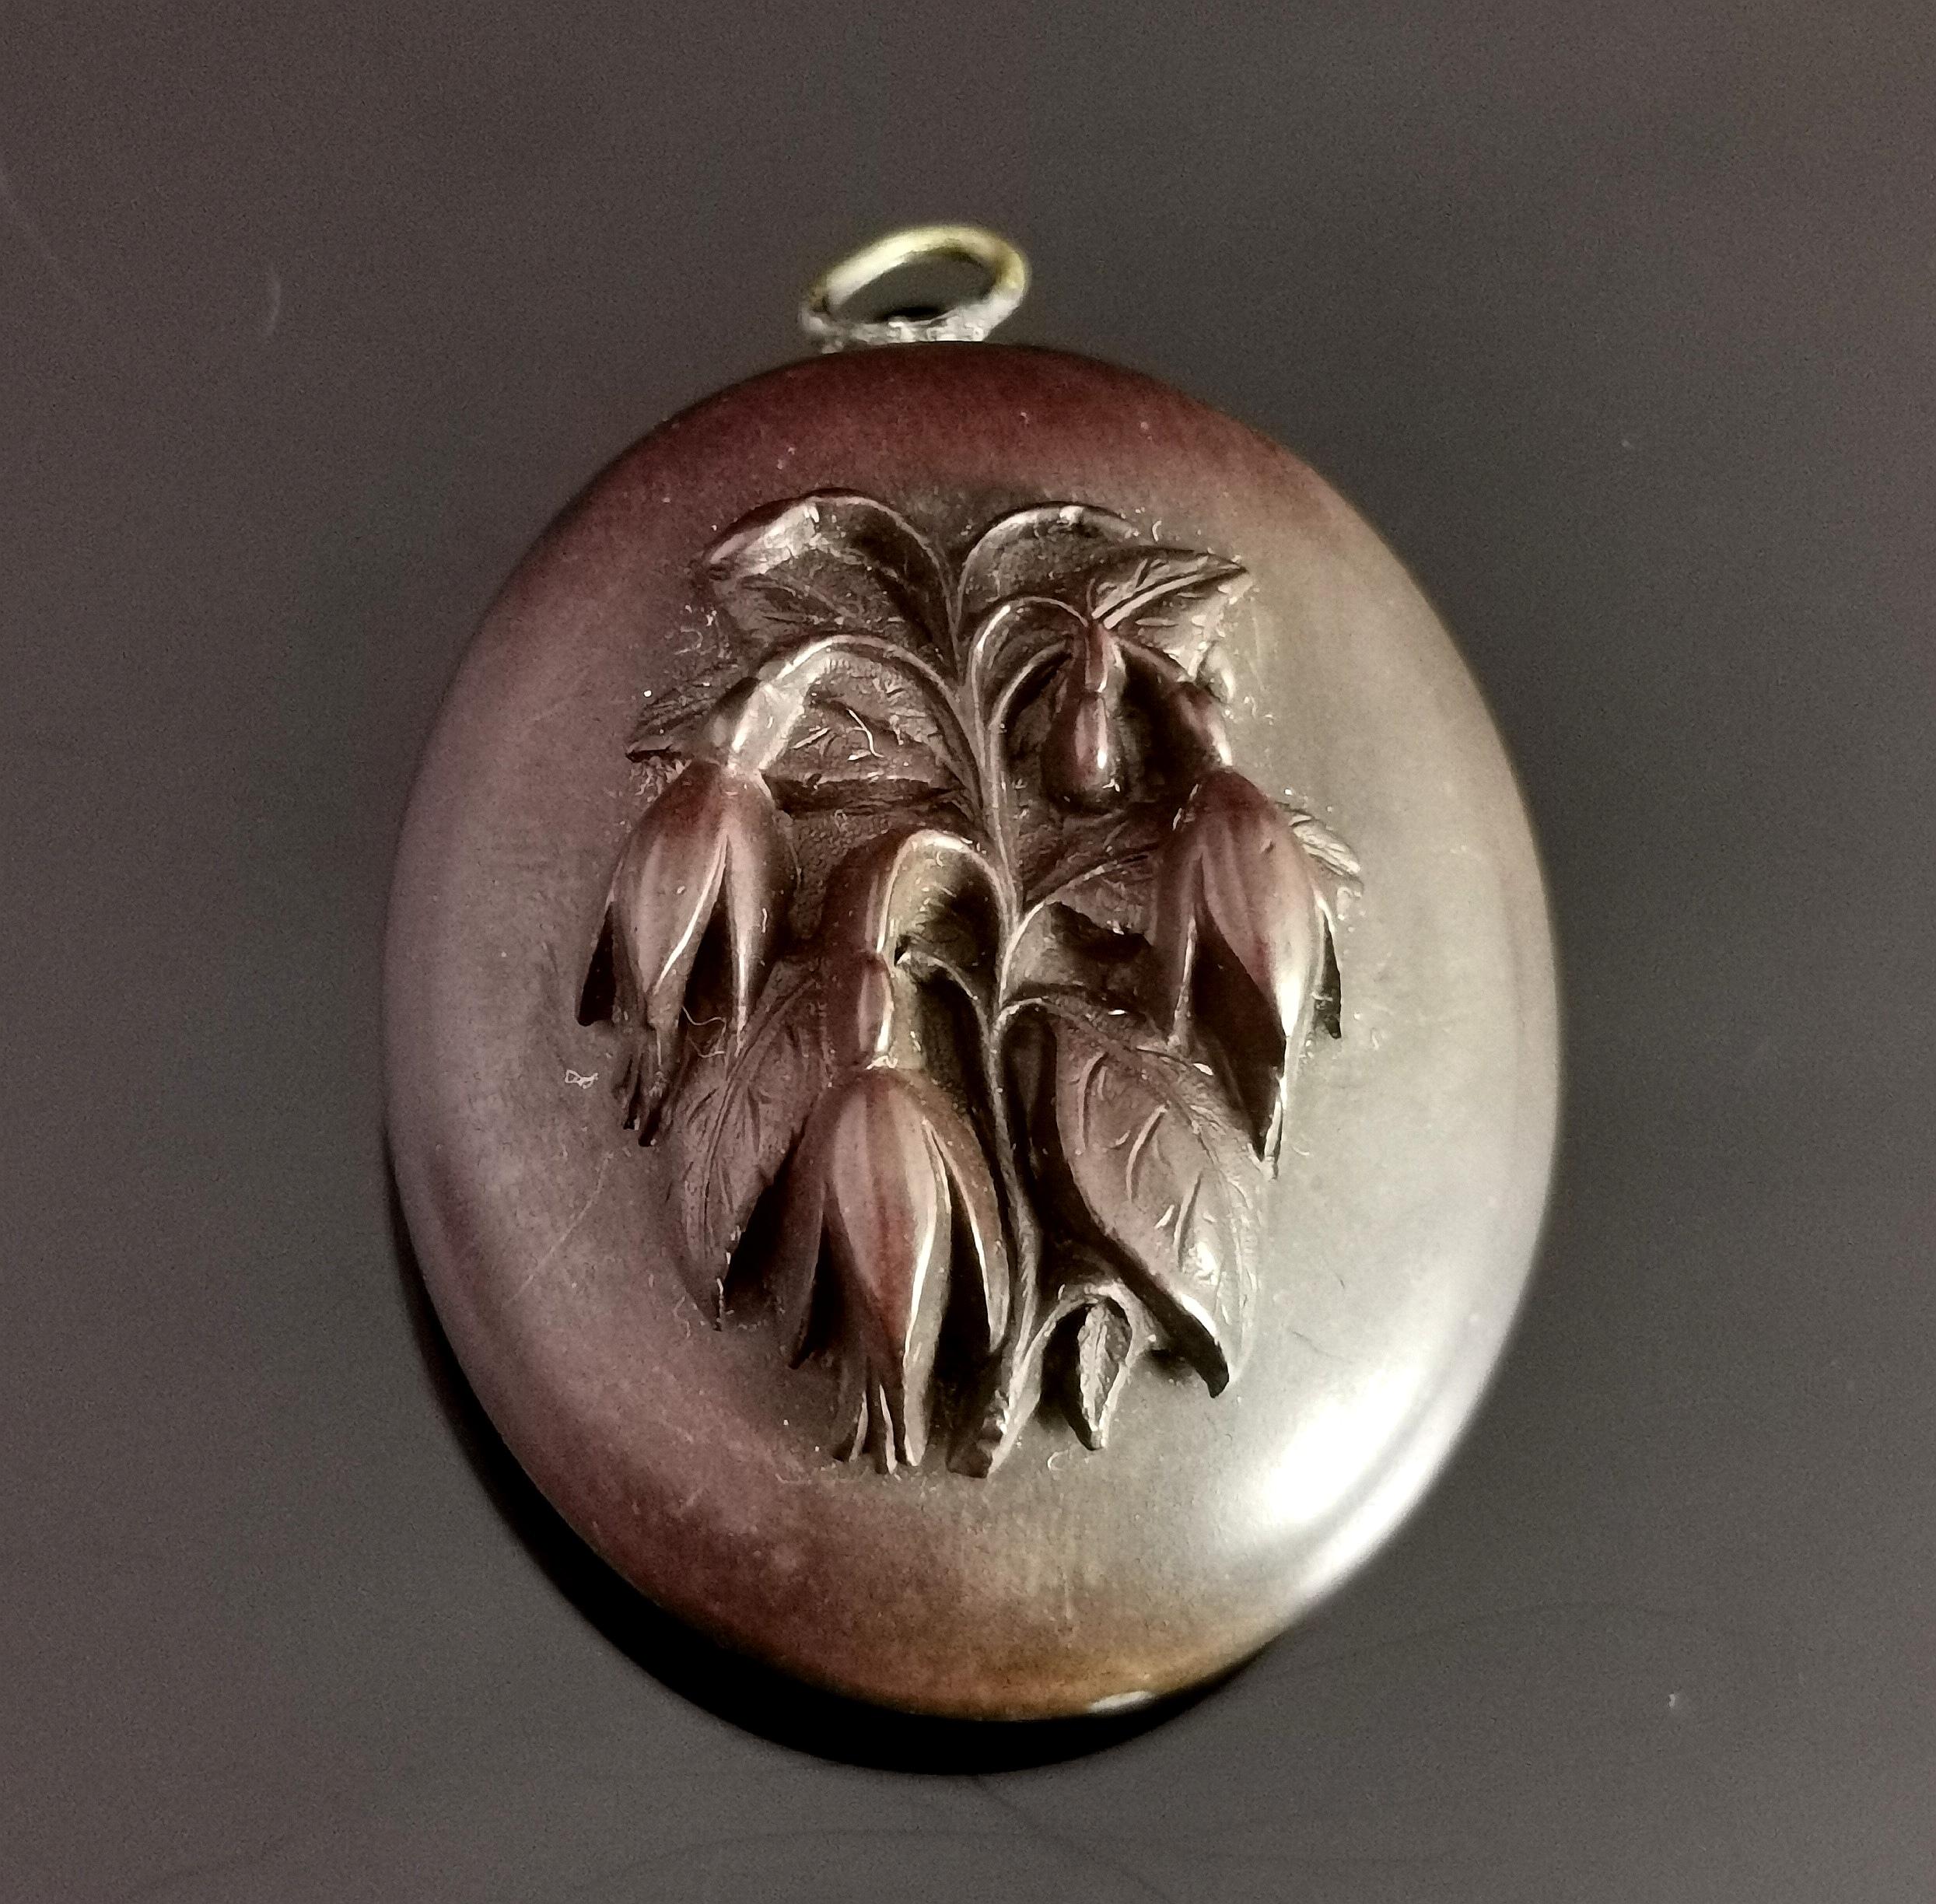 A beautiful antique Victorian mourning locket.

It is a chunky locket made from vulcanite with an applied spray of flowers possibly Fuschia to the front.

The locket has browned with age as is very common with old Vulcanite but it would have been